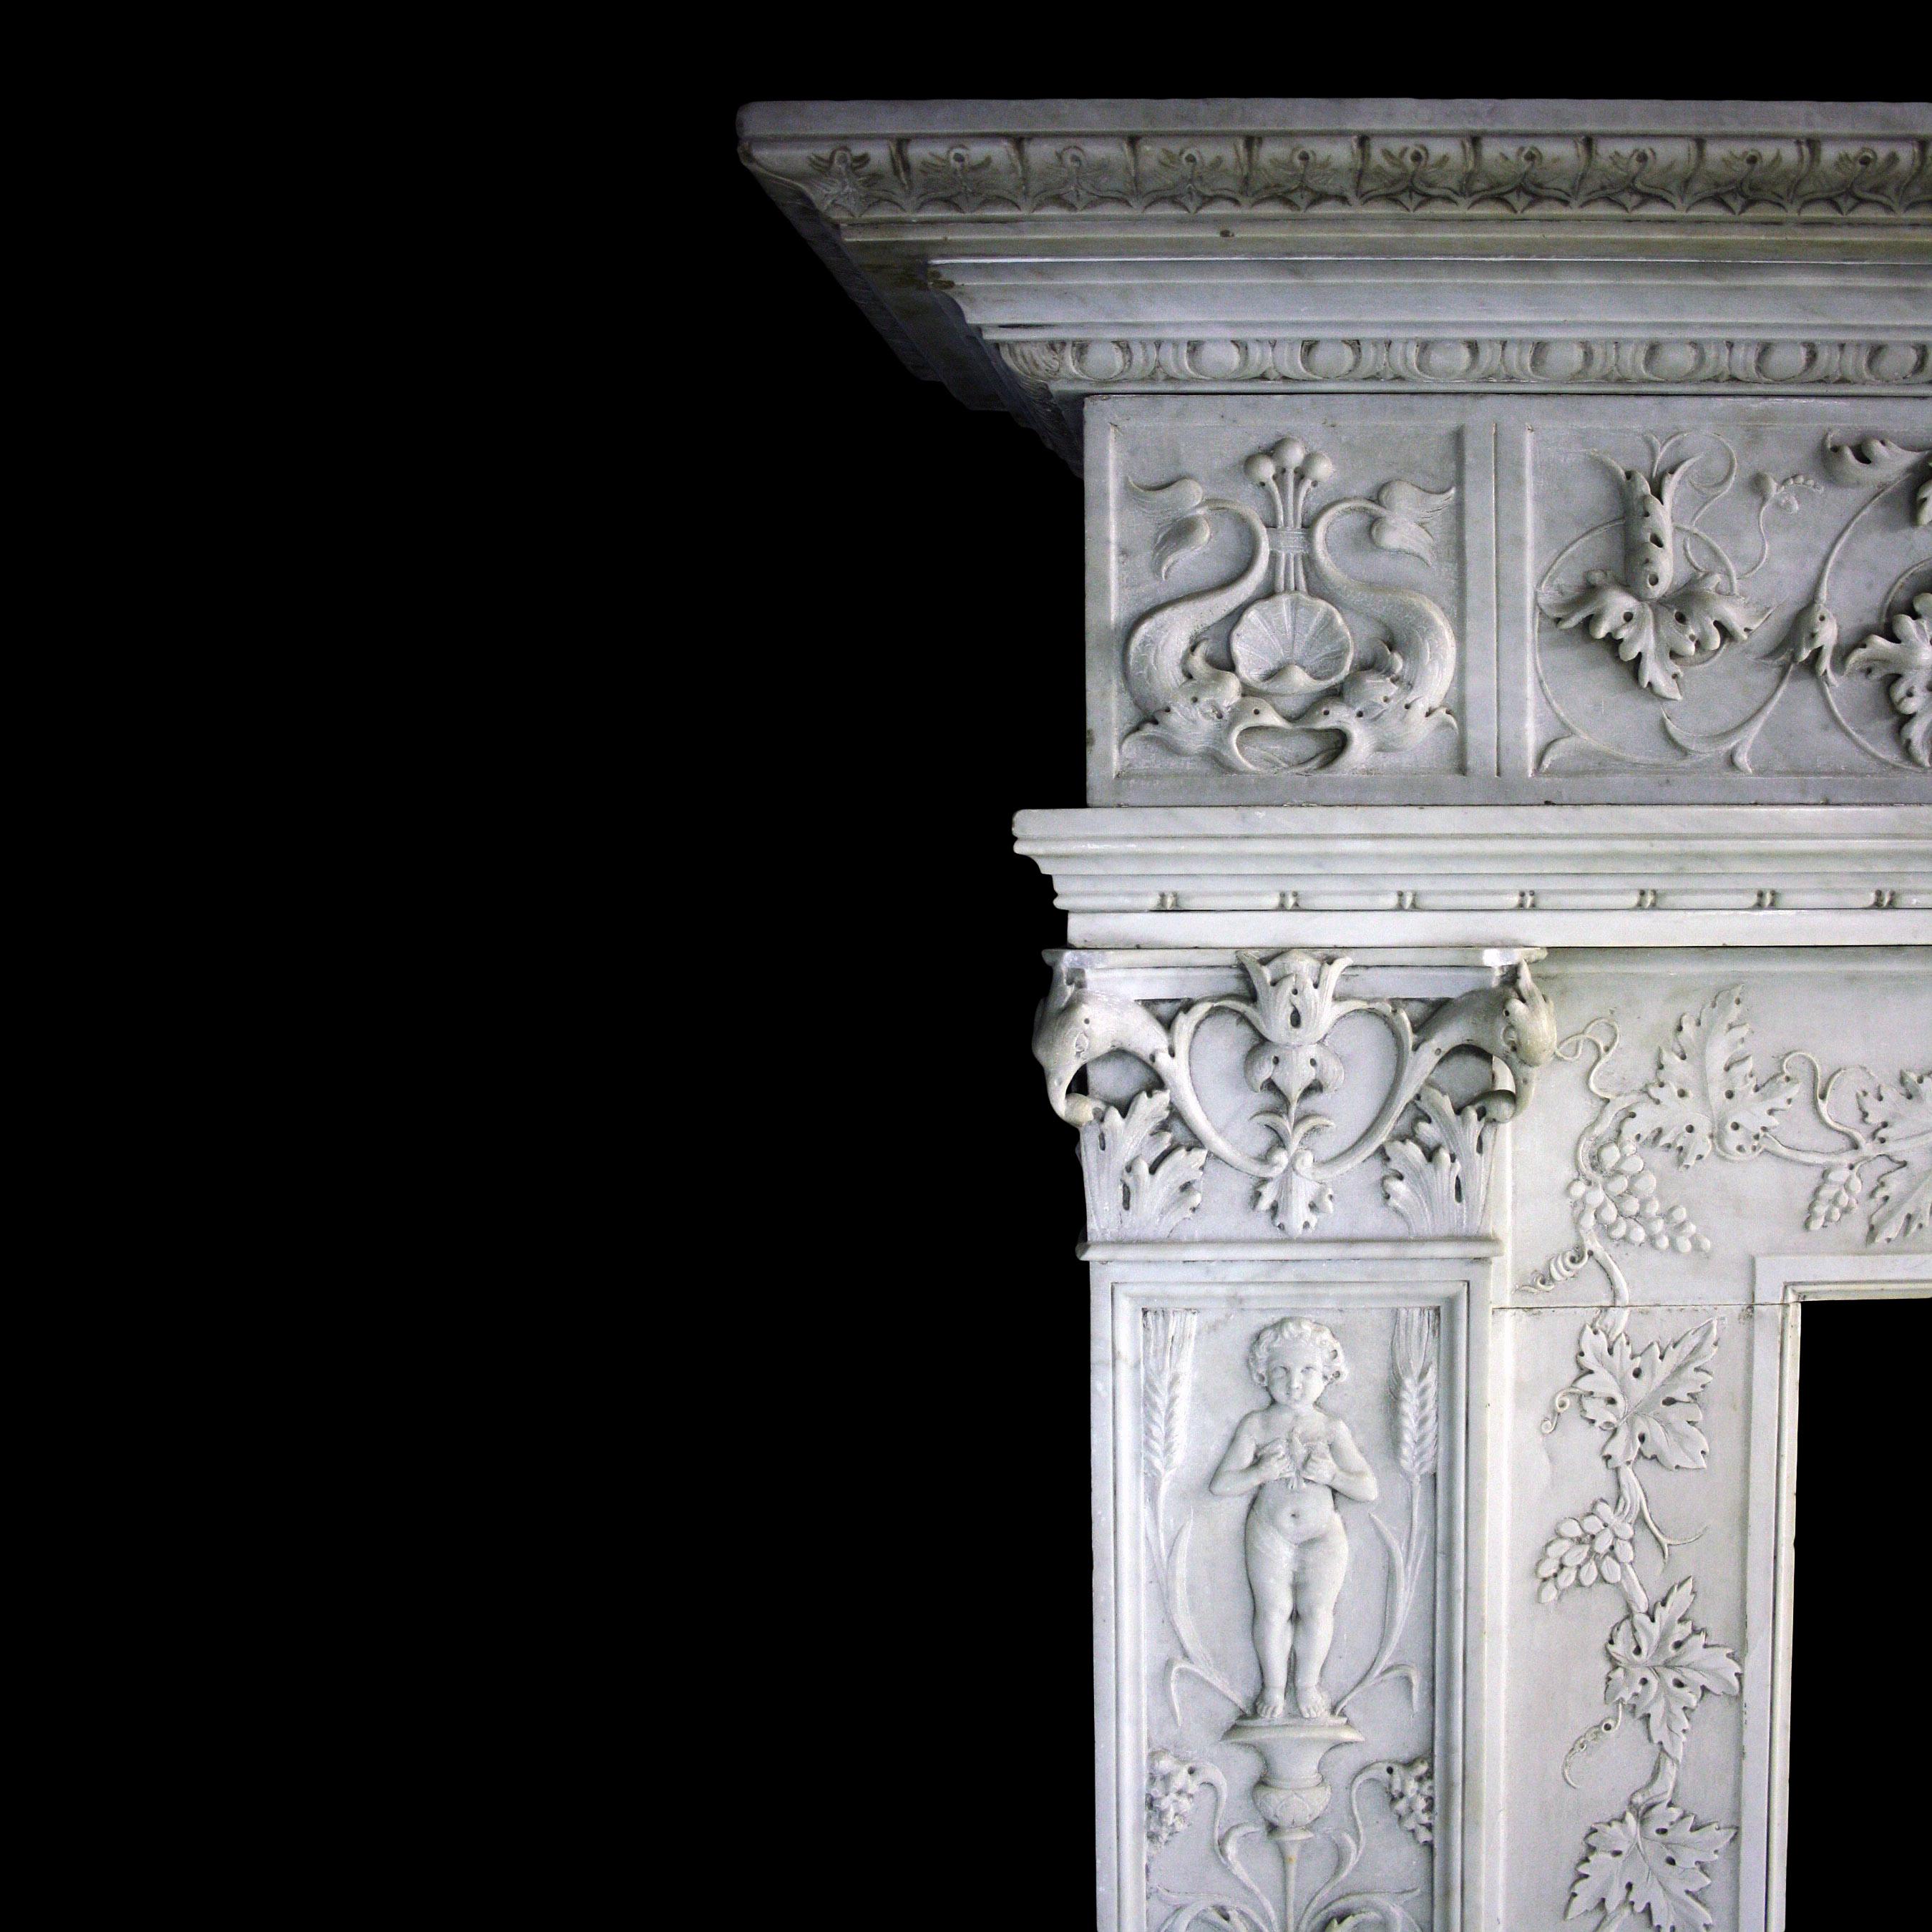 A 19th century carved Carrara marble chimneypiece in the Renaissance style. It has stepped moulded foot blocks below richly decorated jambs with Corinthian capitals. The in - grounds has twining vines and bunches of grapes, below a frieze featuring